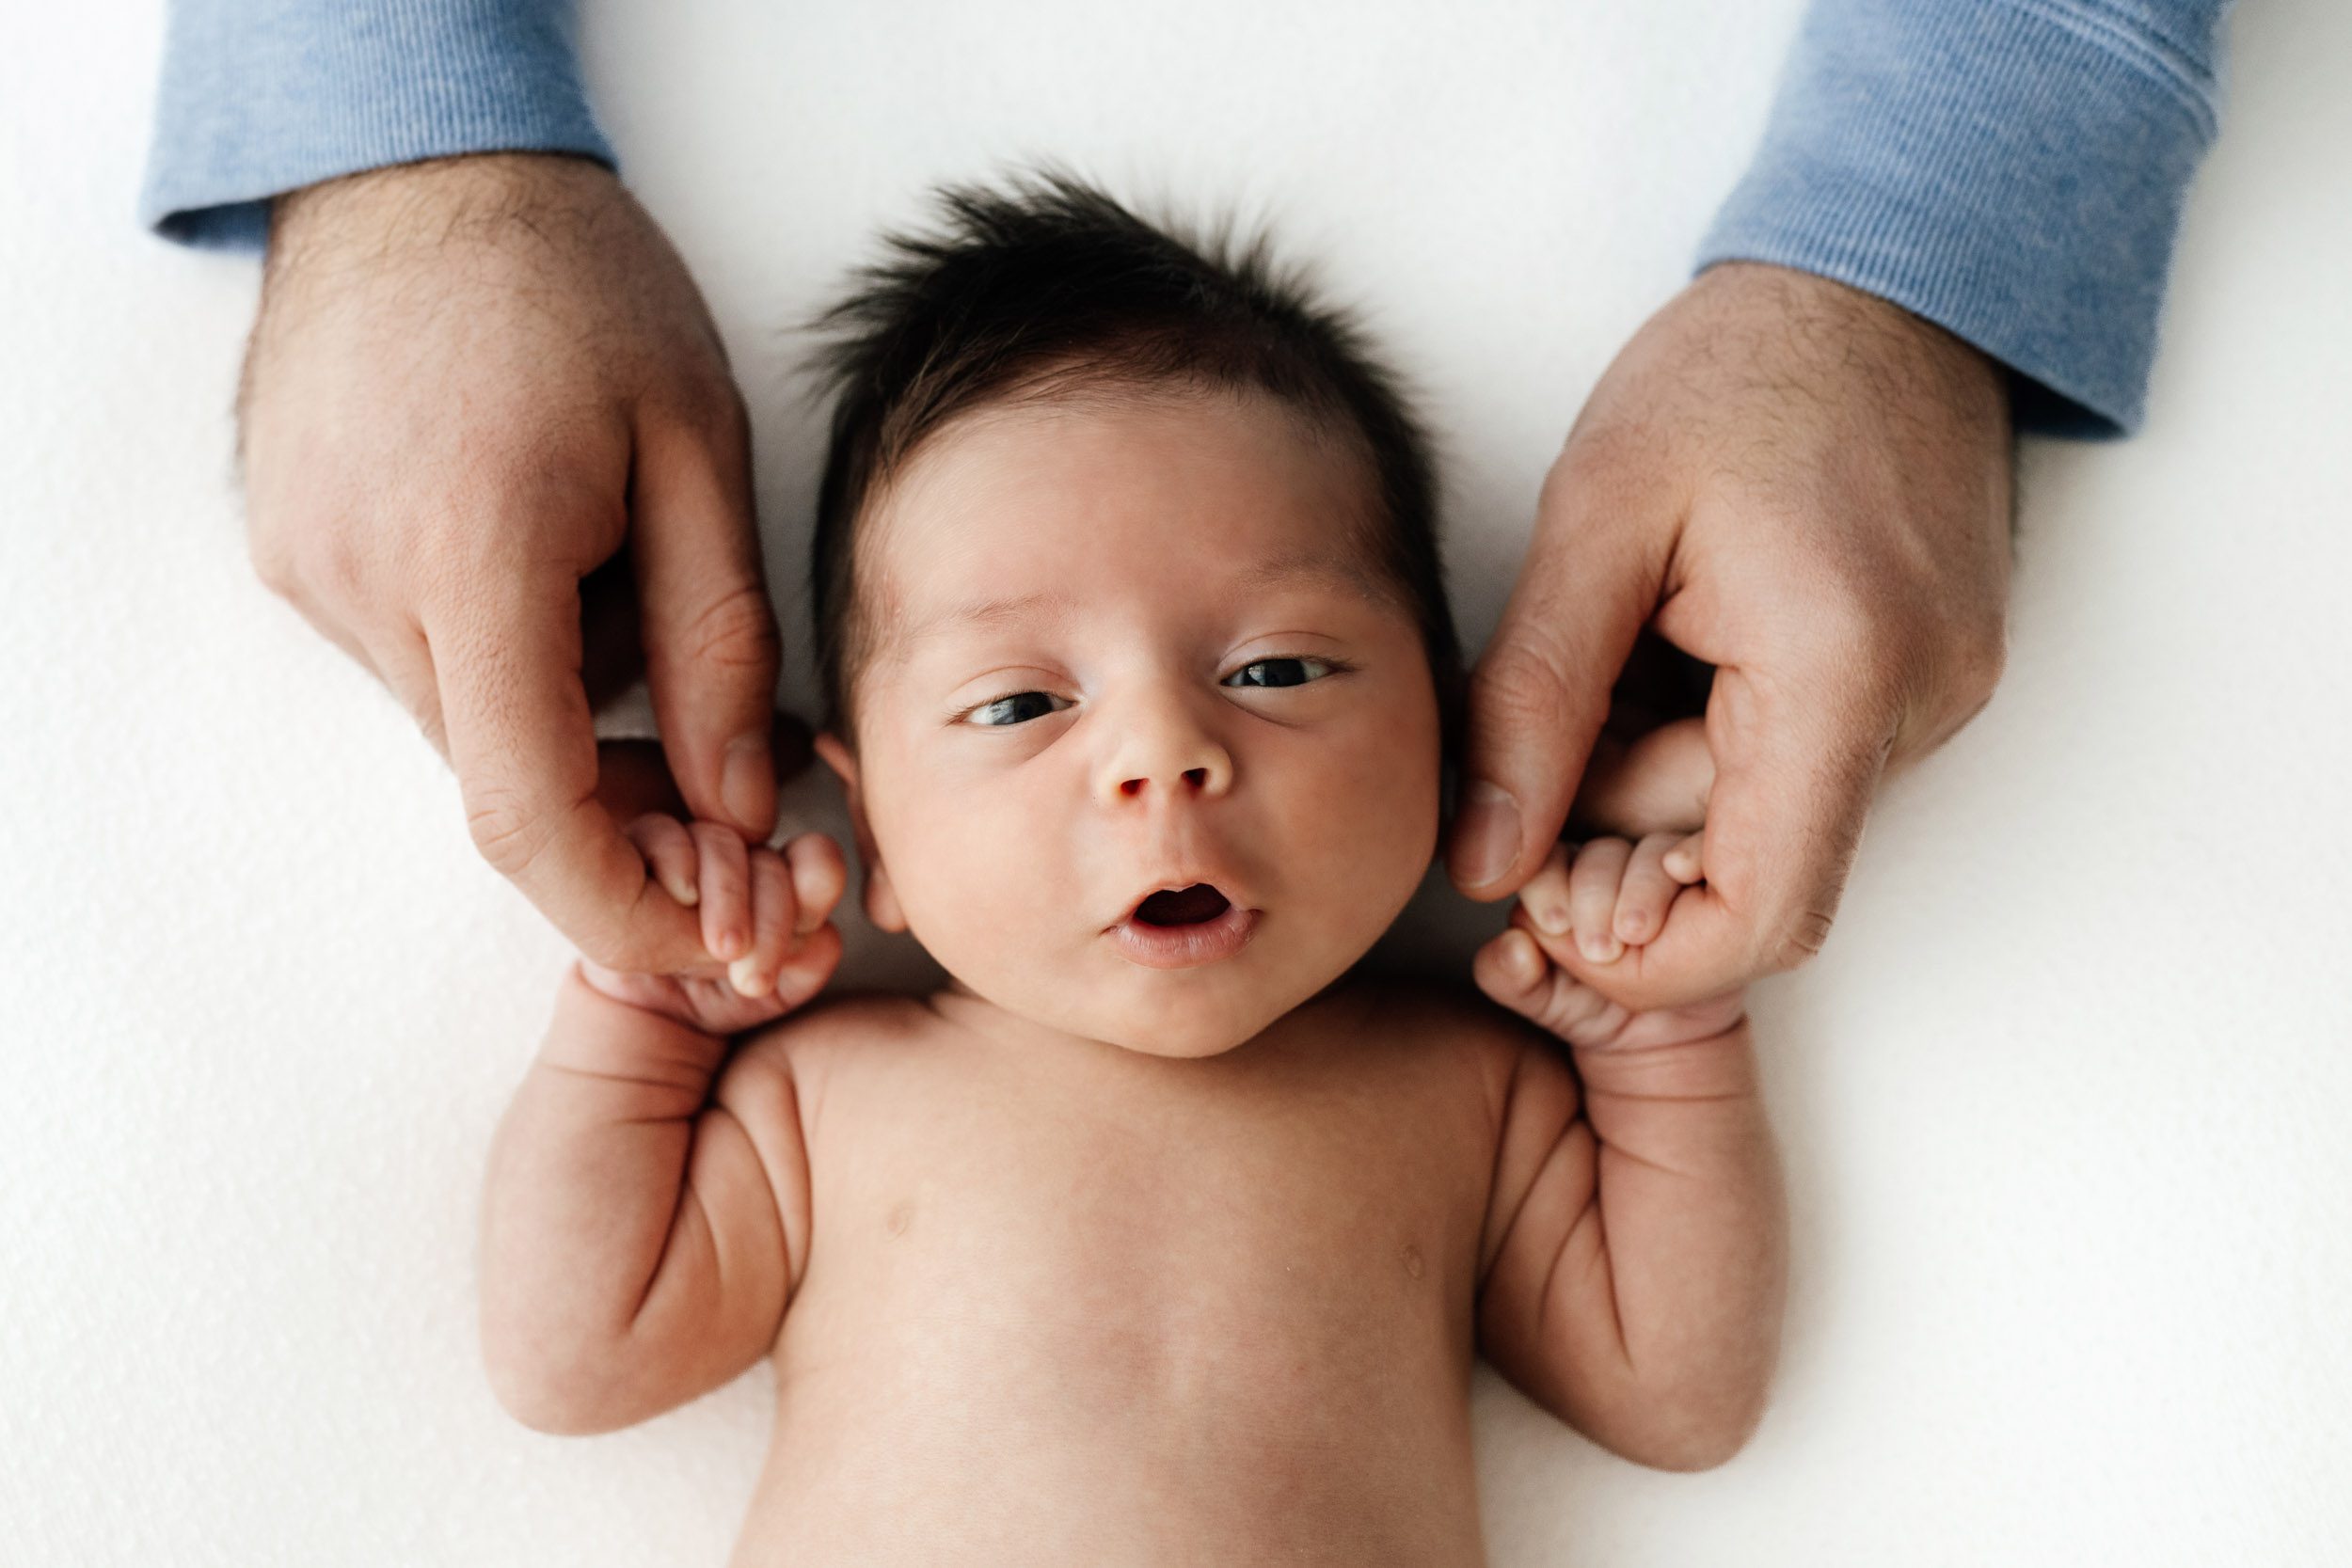 a baby boy laying on a white backdrop and grabbing onto his dad's fingers with his hands as he looks right at the camera during a natural newborn photoshoot